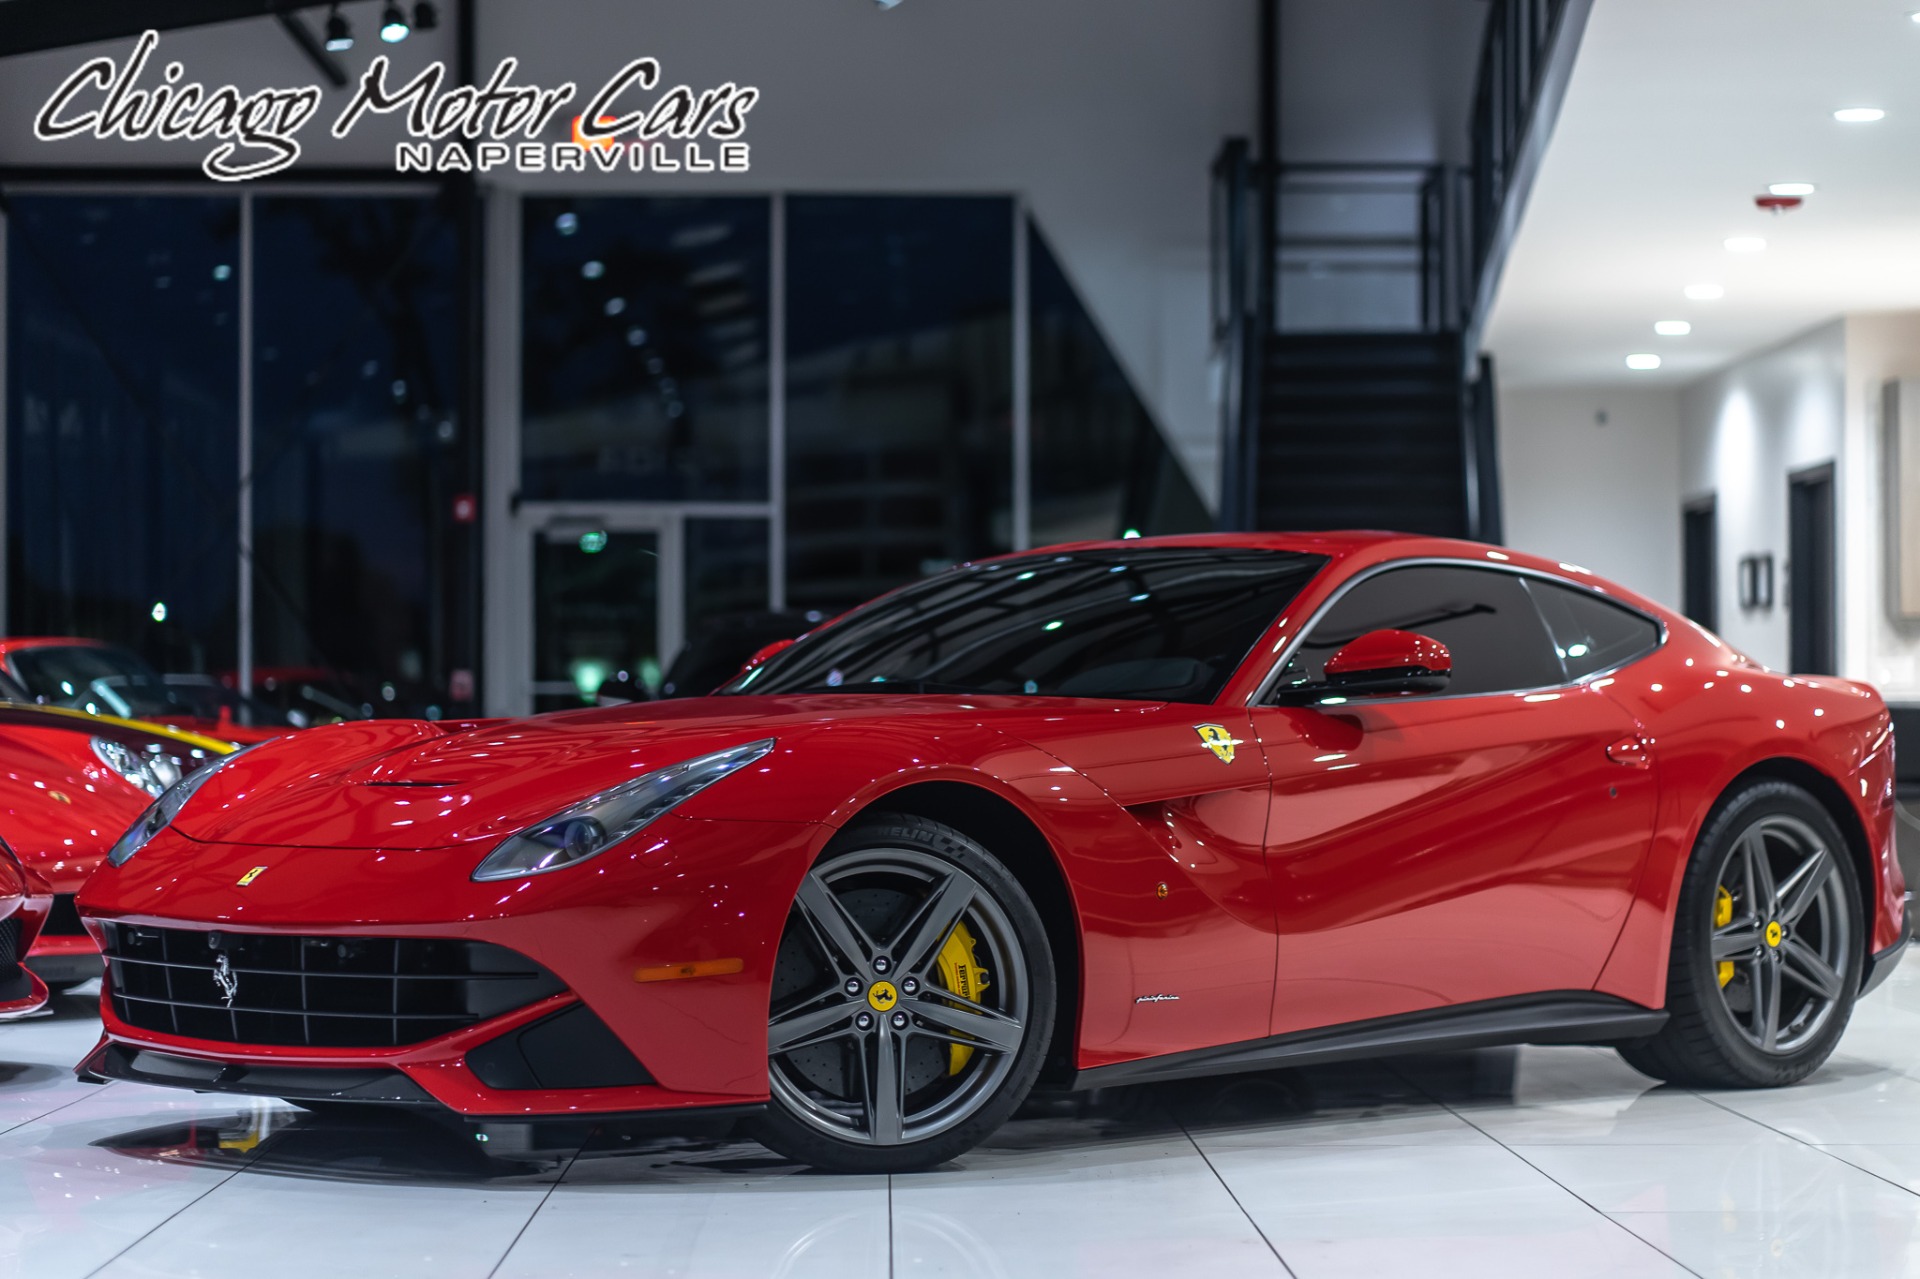 Used 2015 Ferrari F12 Berlinetta $410K+ MSRP Full Front PPF + Built in  Radar Loaded Low Miles! For Sale (Special Pricing) | Chicago Motor Cars  Stock #17370A